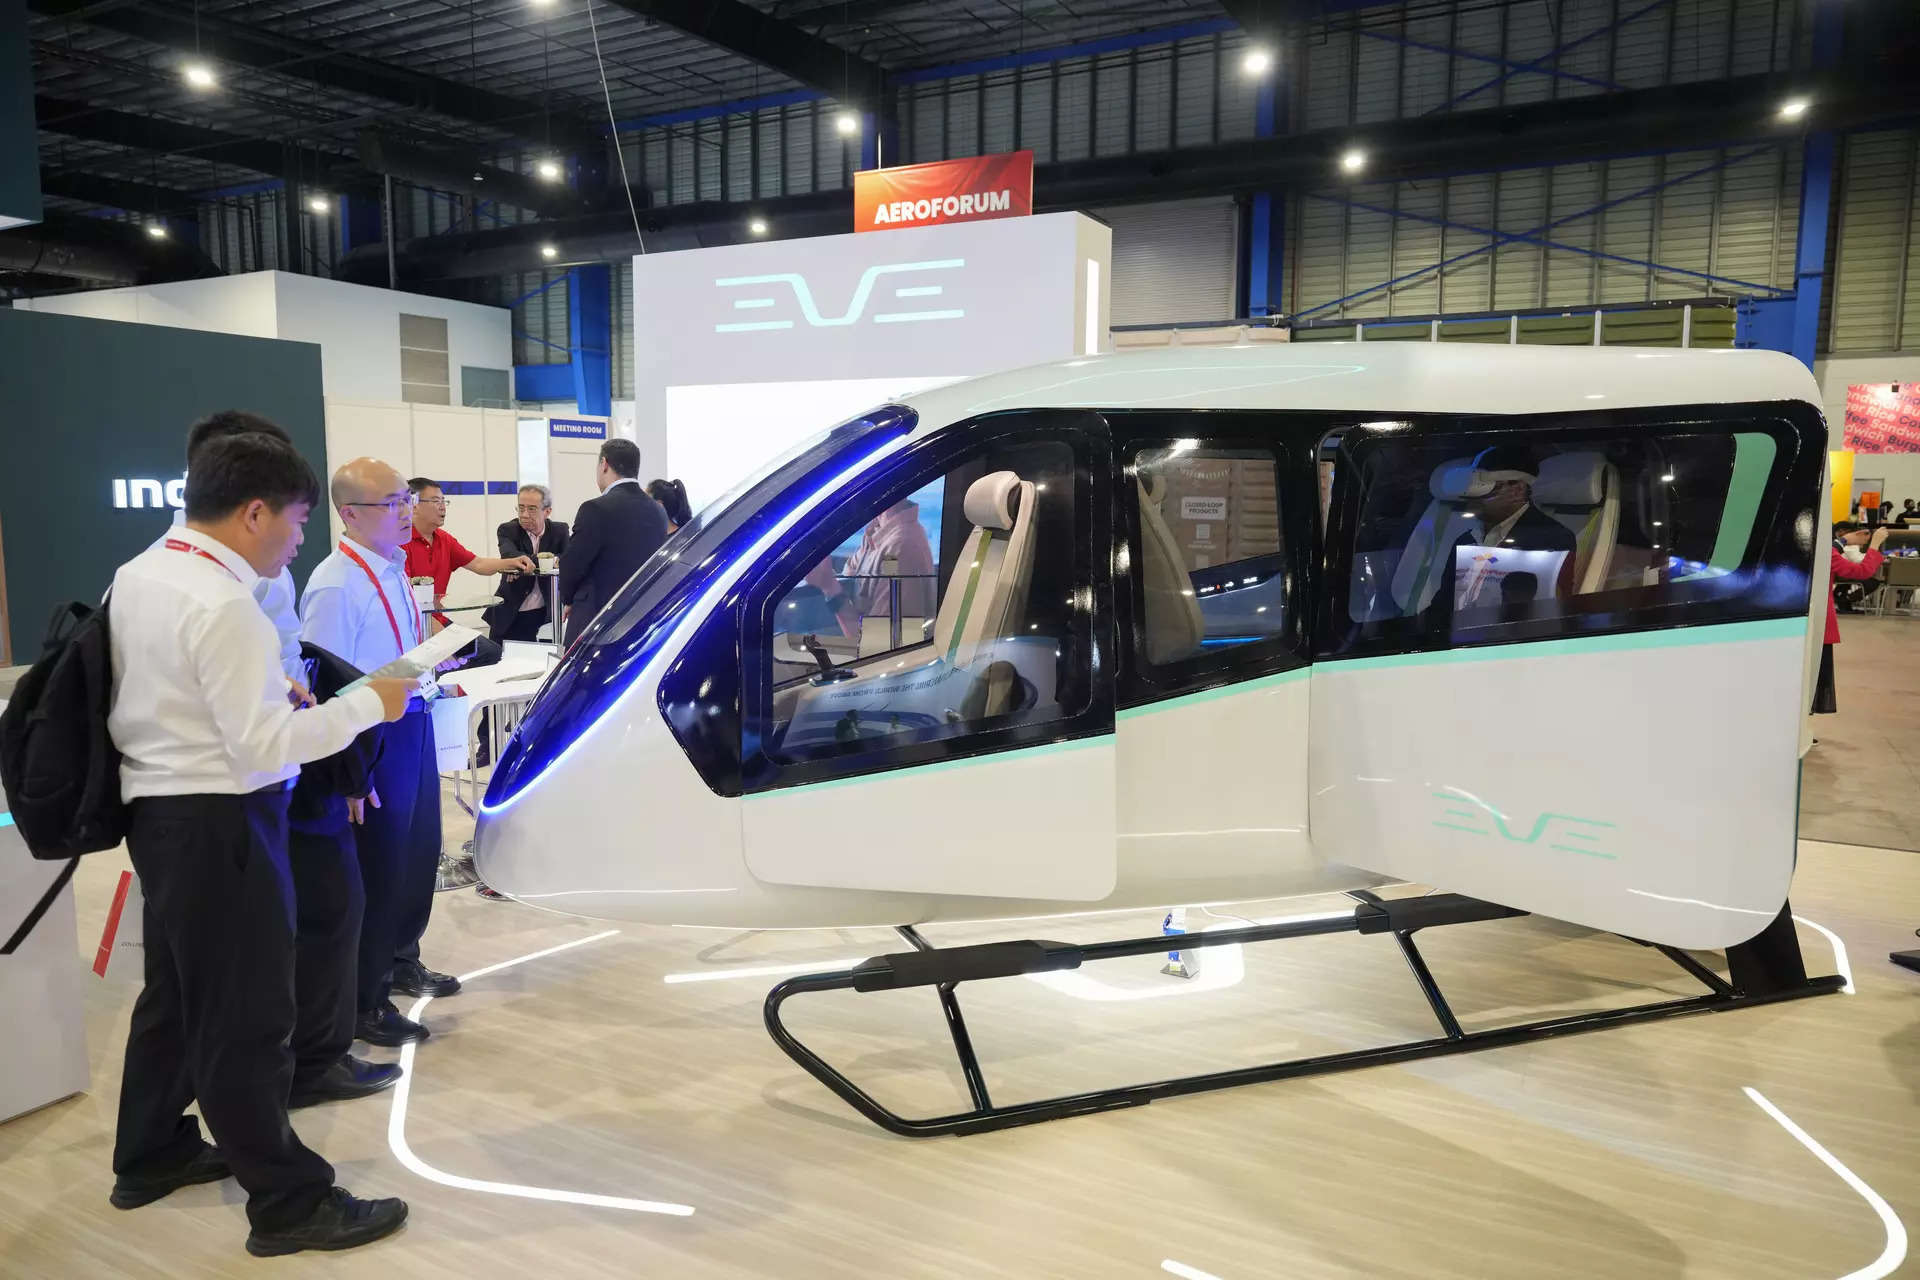 <p>Experts say they could help offset carbon emissions from the traditional aviation sector, but there are plenty of technological and regulatory challenges to making air taxis commercially viable.</p>